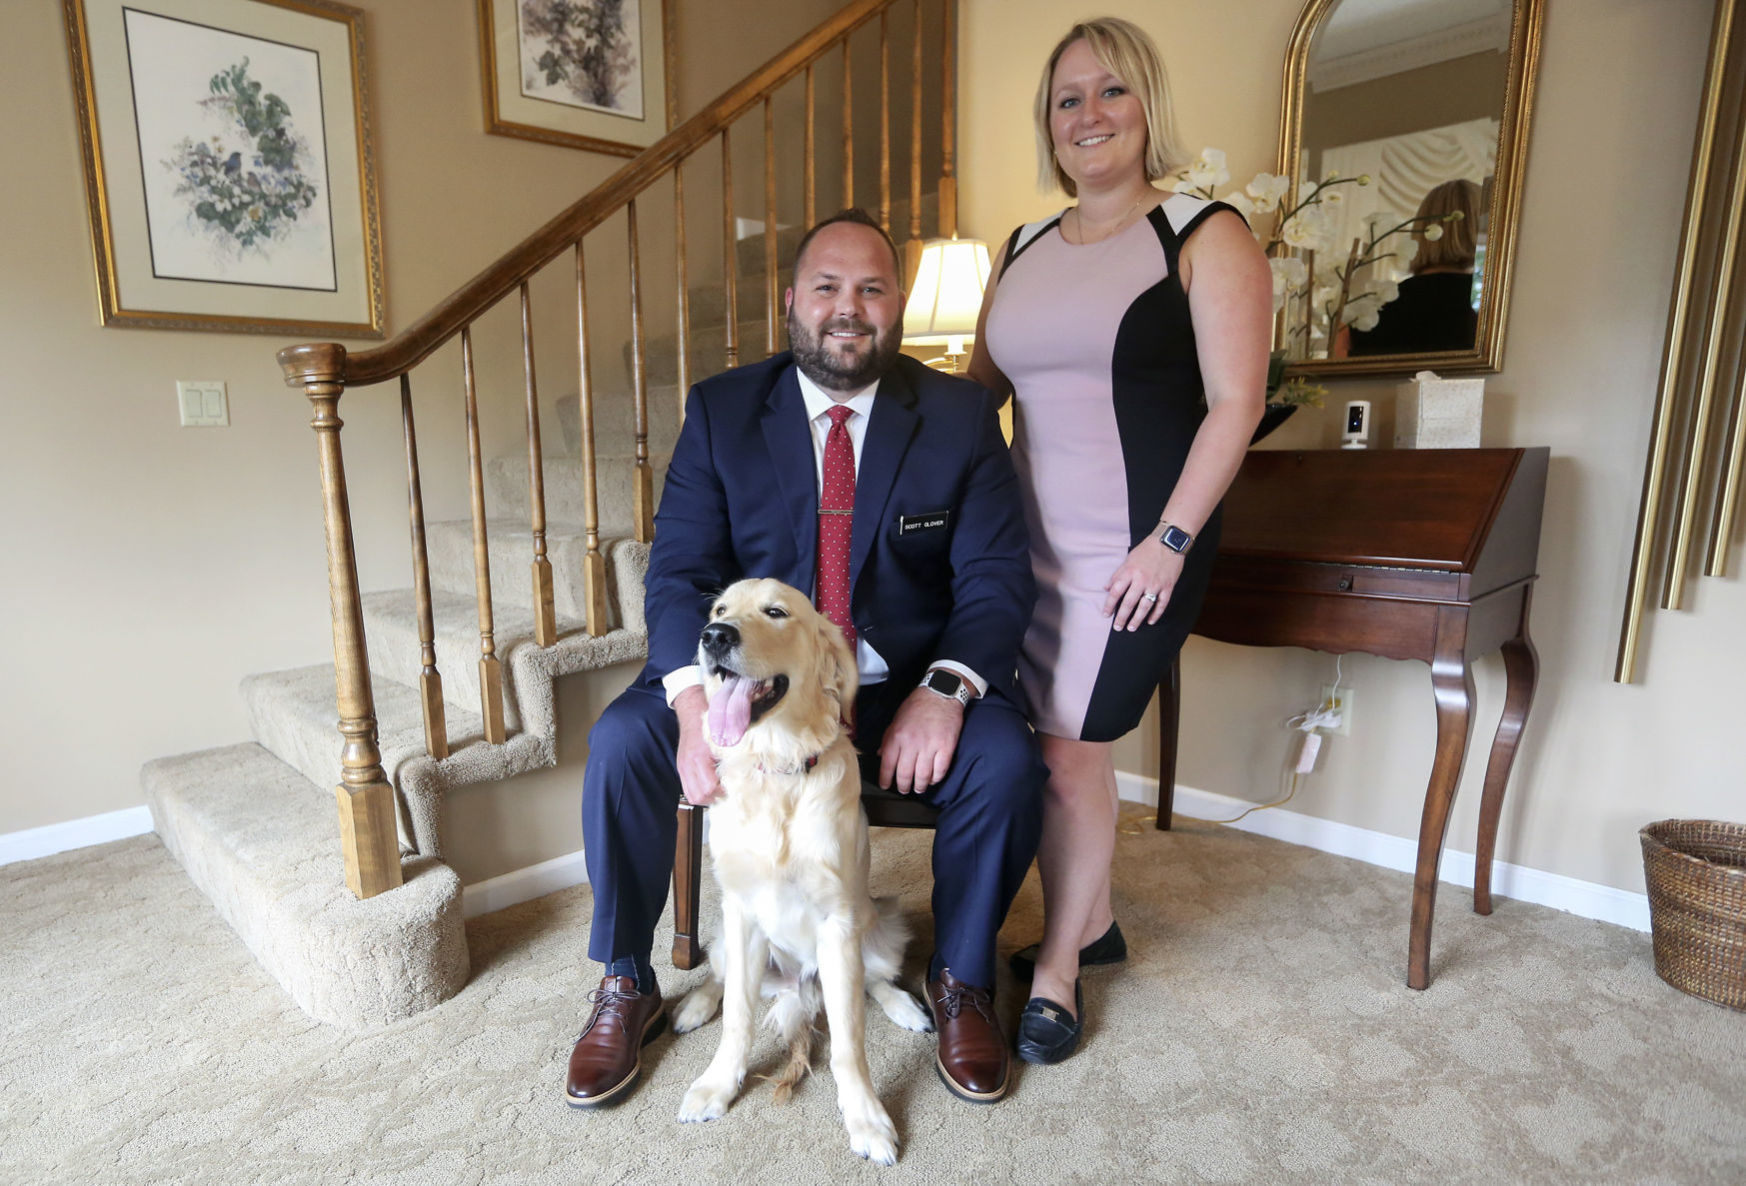 Managing Funeral Director Scott Glover and Office Manager Samantha Glover with their dog, Stanley, at Hoffmann Schneider & Kitchen Funeral Home and Cremation Service in Dubuque, on Friday, June 19, 2020. Stanley is an English golden retriever and comes to the business to provide stress relief for employees and customers. PHOTO CREDIT: NICKI KOHL